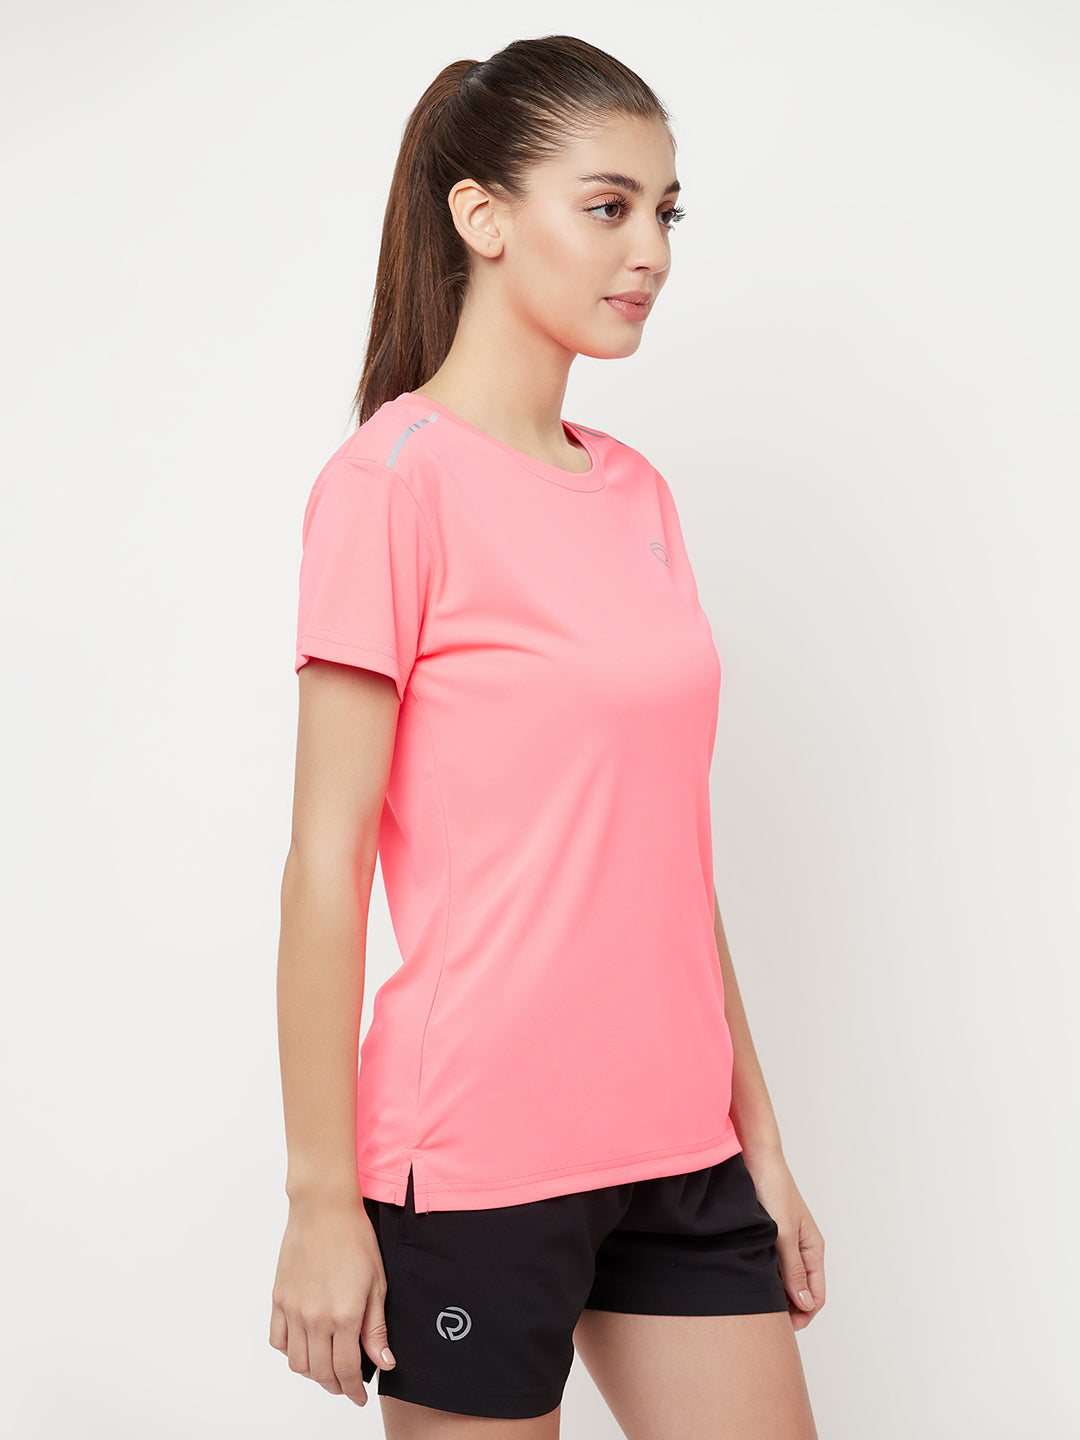 Performance Sports T-shirt - Pack of 2 Neon Pink & Neon Yellow